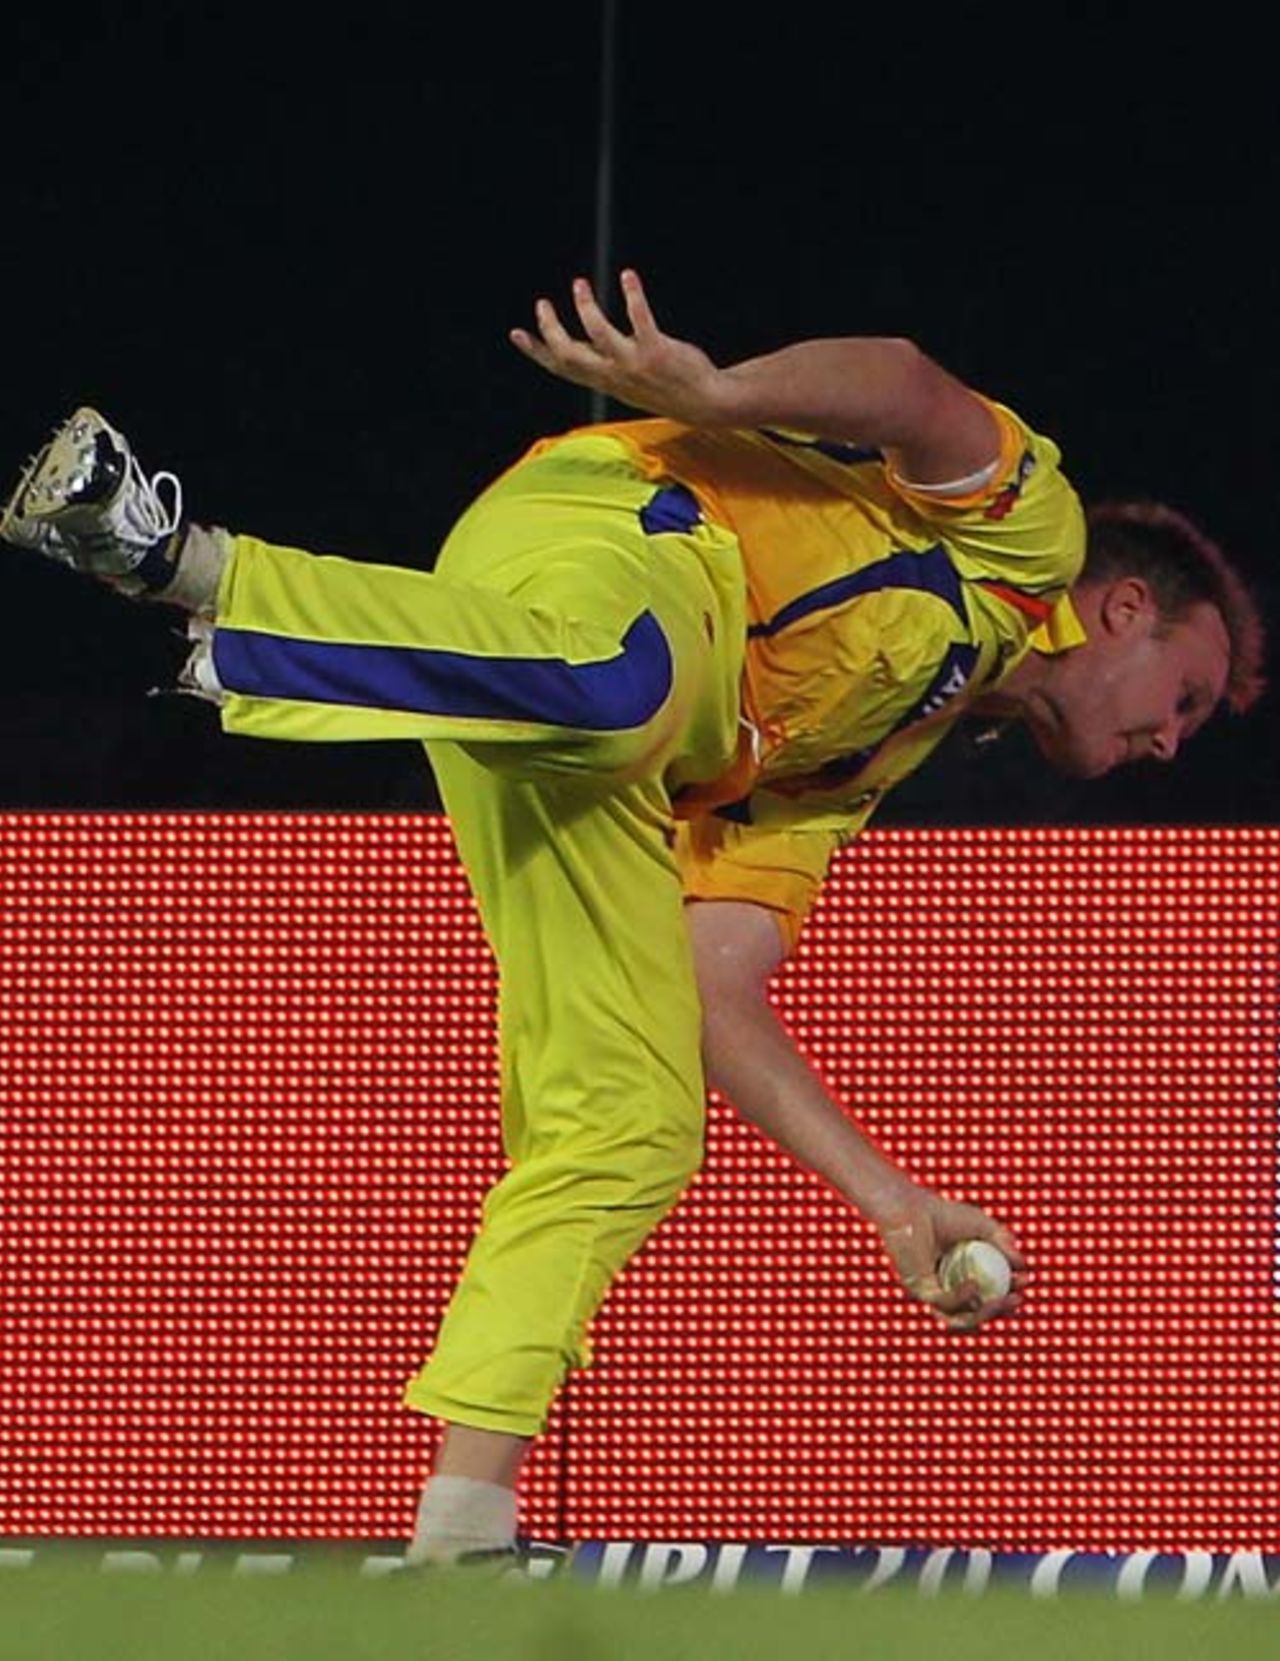 Doug Bollinger in the process of pouching a stunning catch, Chennai Super Kings v Rajasthan Royals, IPL, Chennai, April 3, 2010